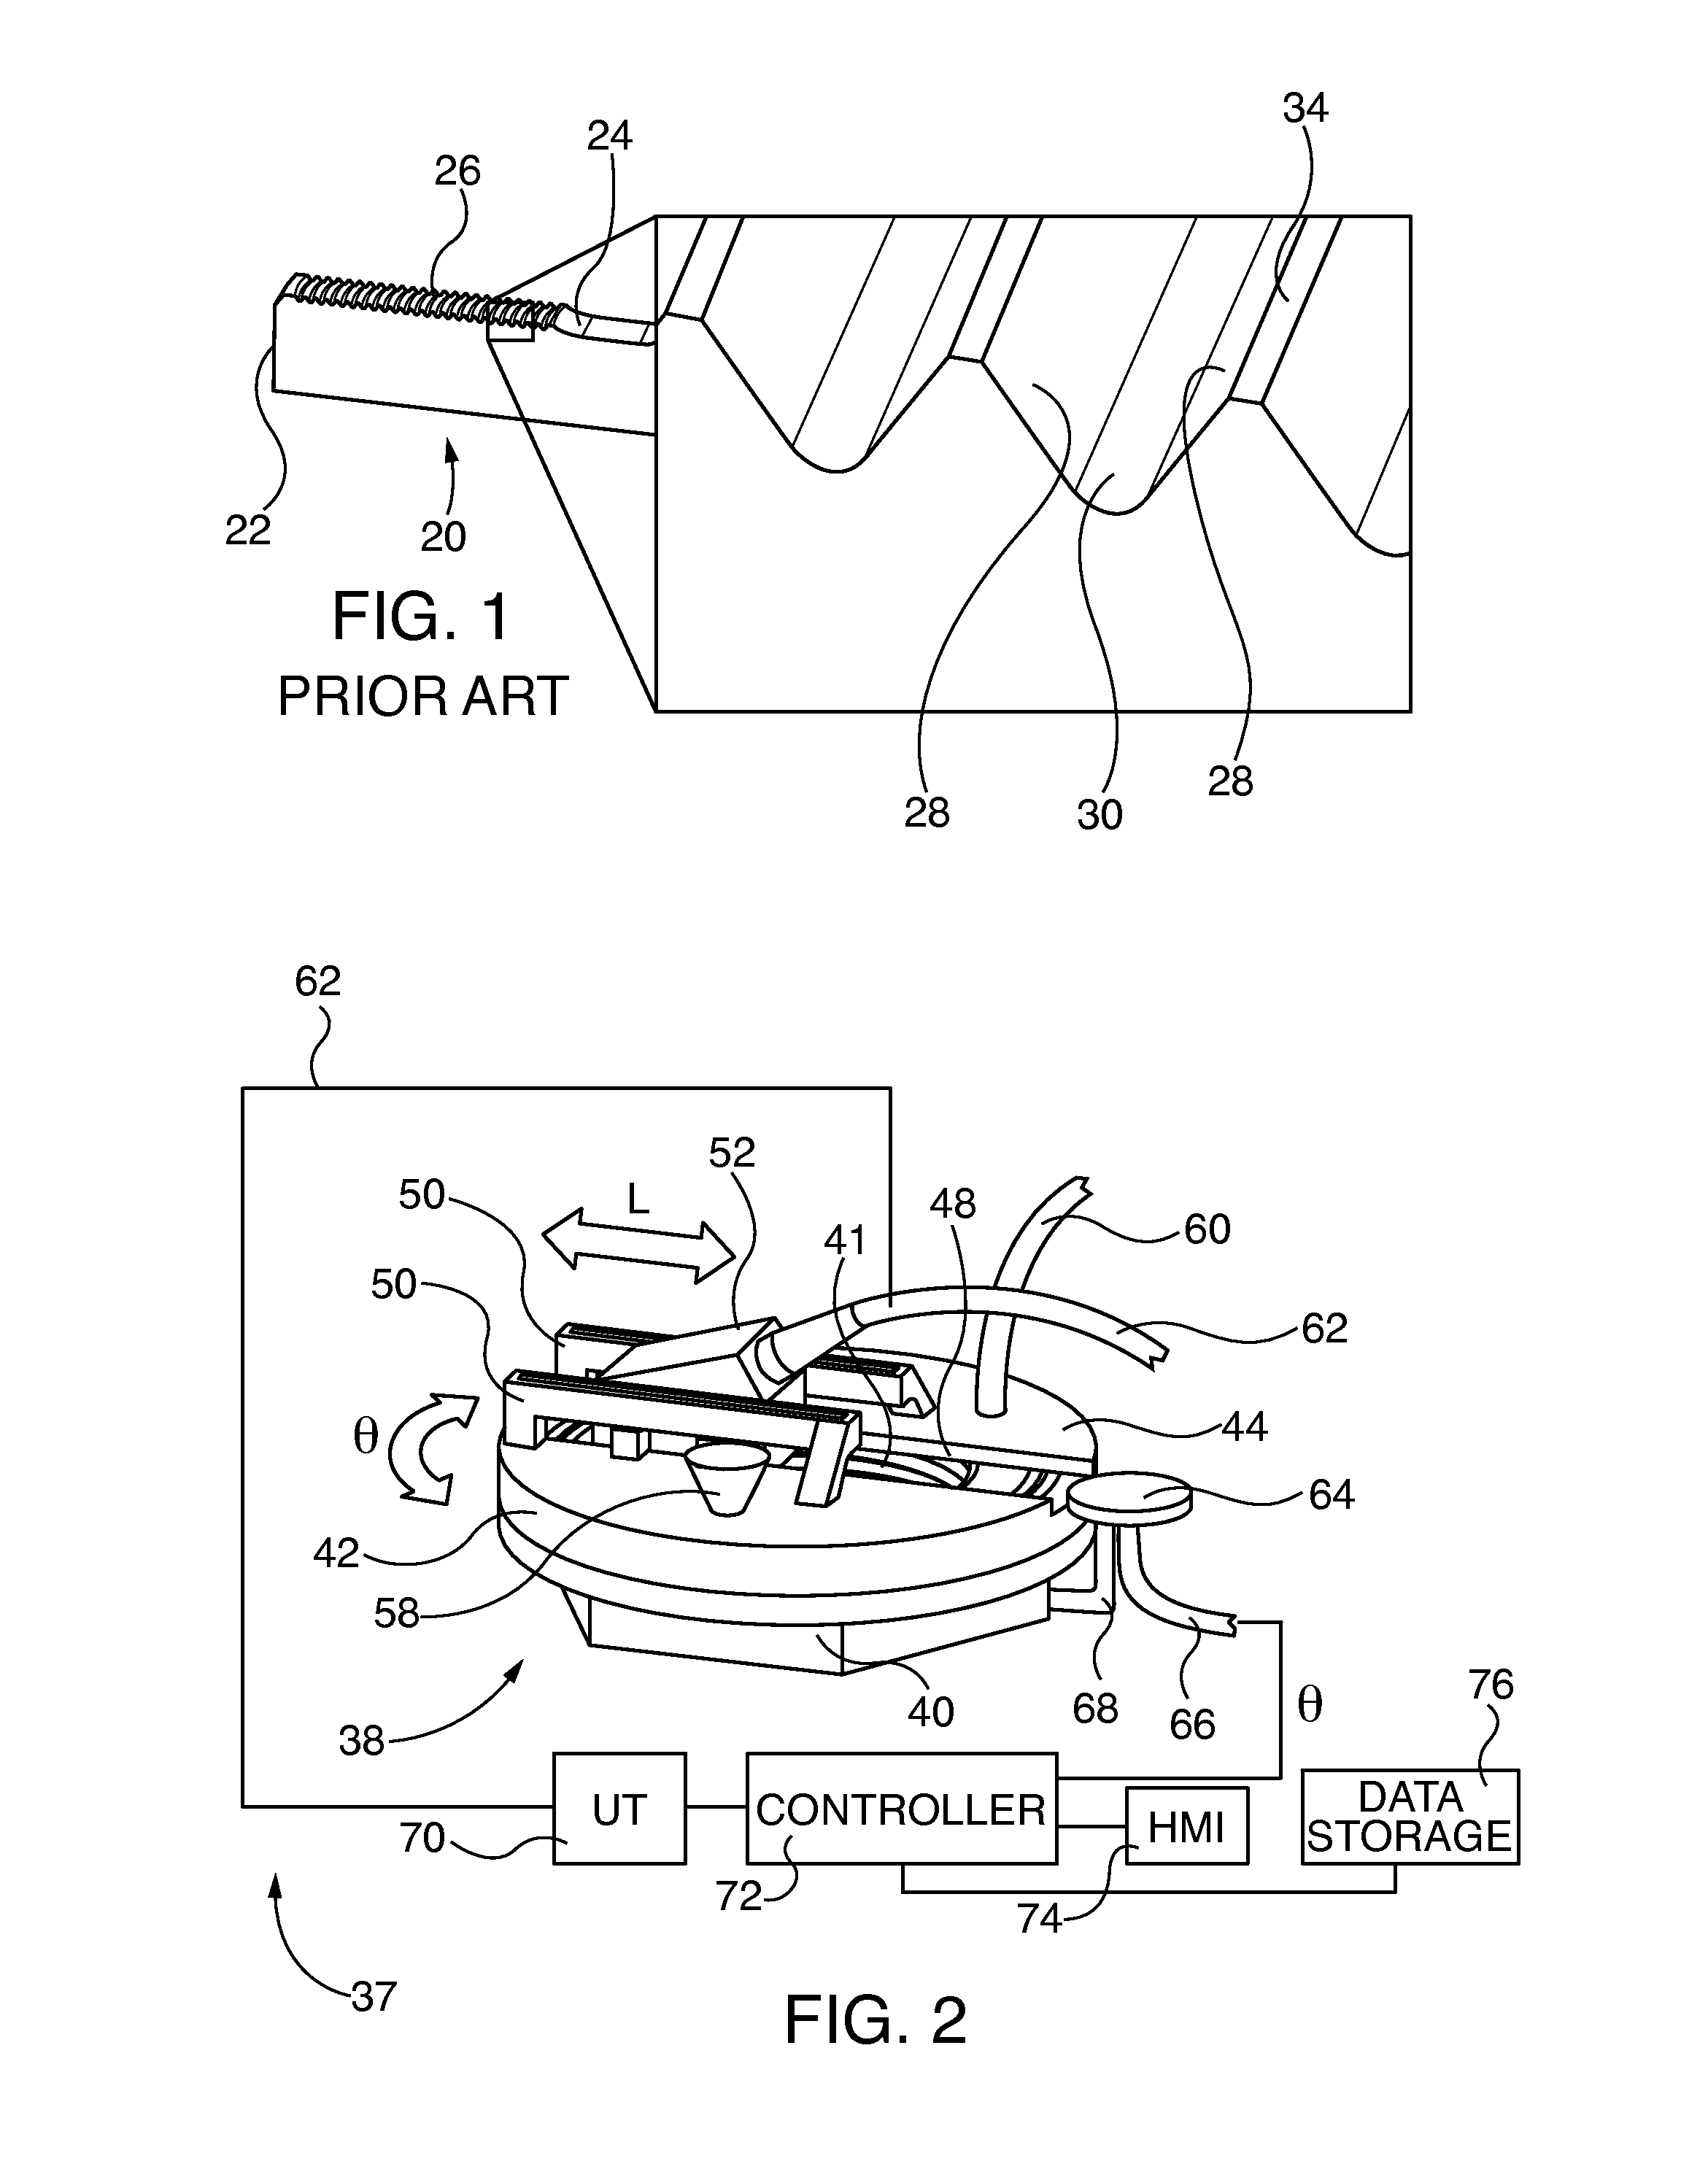 Phased array ultrasonic bolt inspection apparatus and method